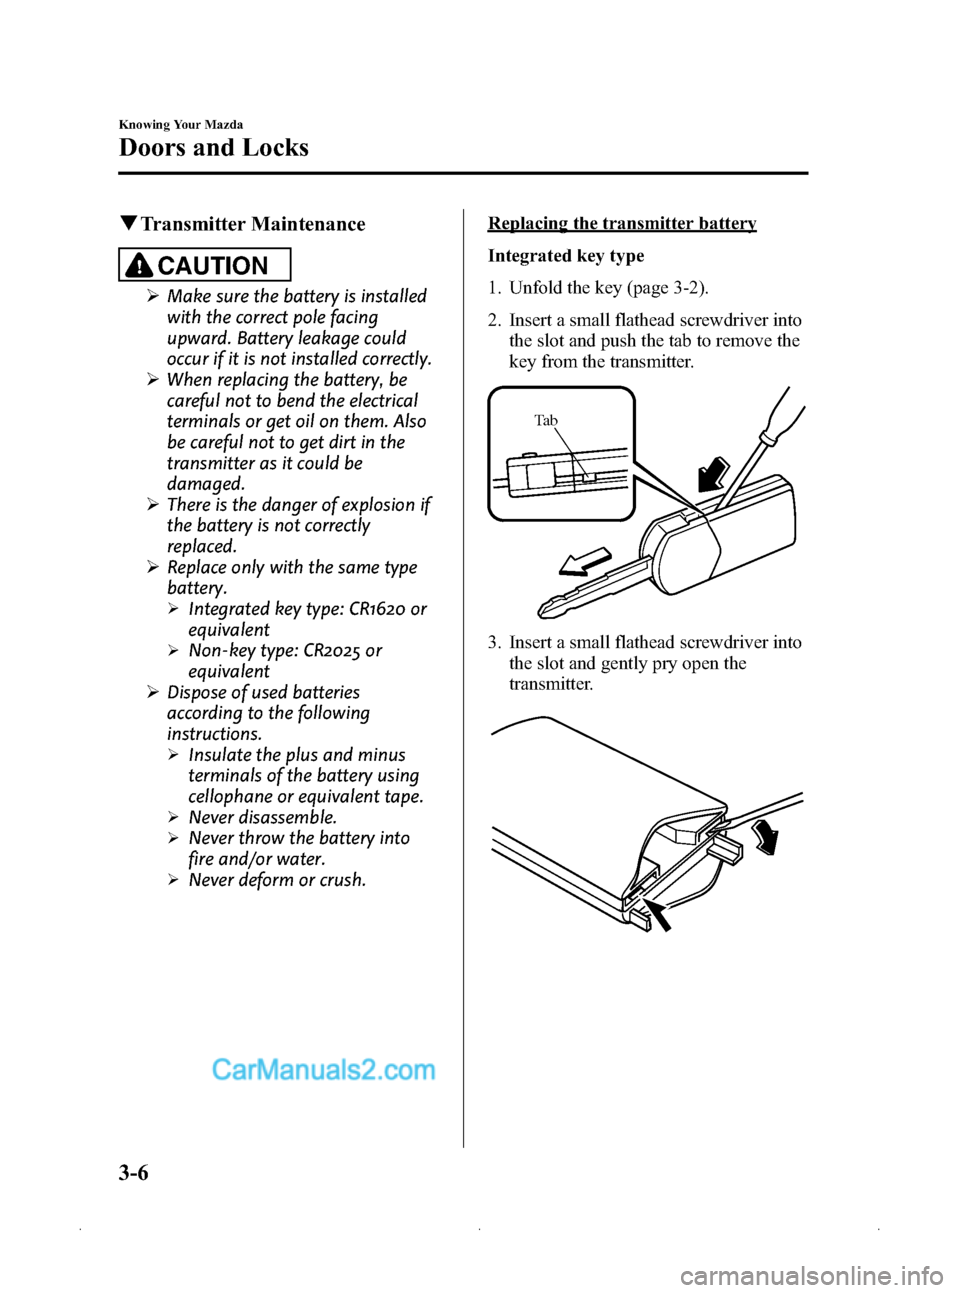 MAZDA MODEL MAZDASPEED 3 2009  Owners Manual (in English) Black plate (80,1)
qTransmitter Maintenance
CAUTION
Ø Make sure the battery is installed
with the correct pole facing
upward. Battery leakage could
occur if it is not installed correctly.
Ø When rep